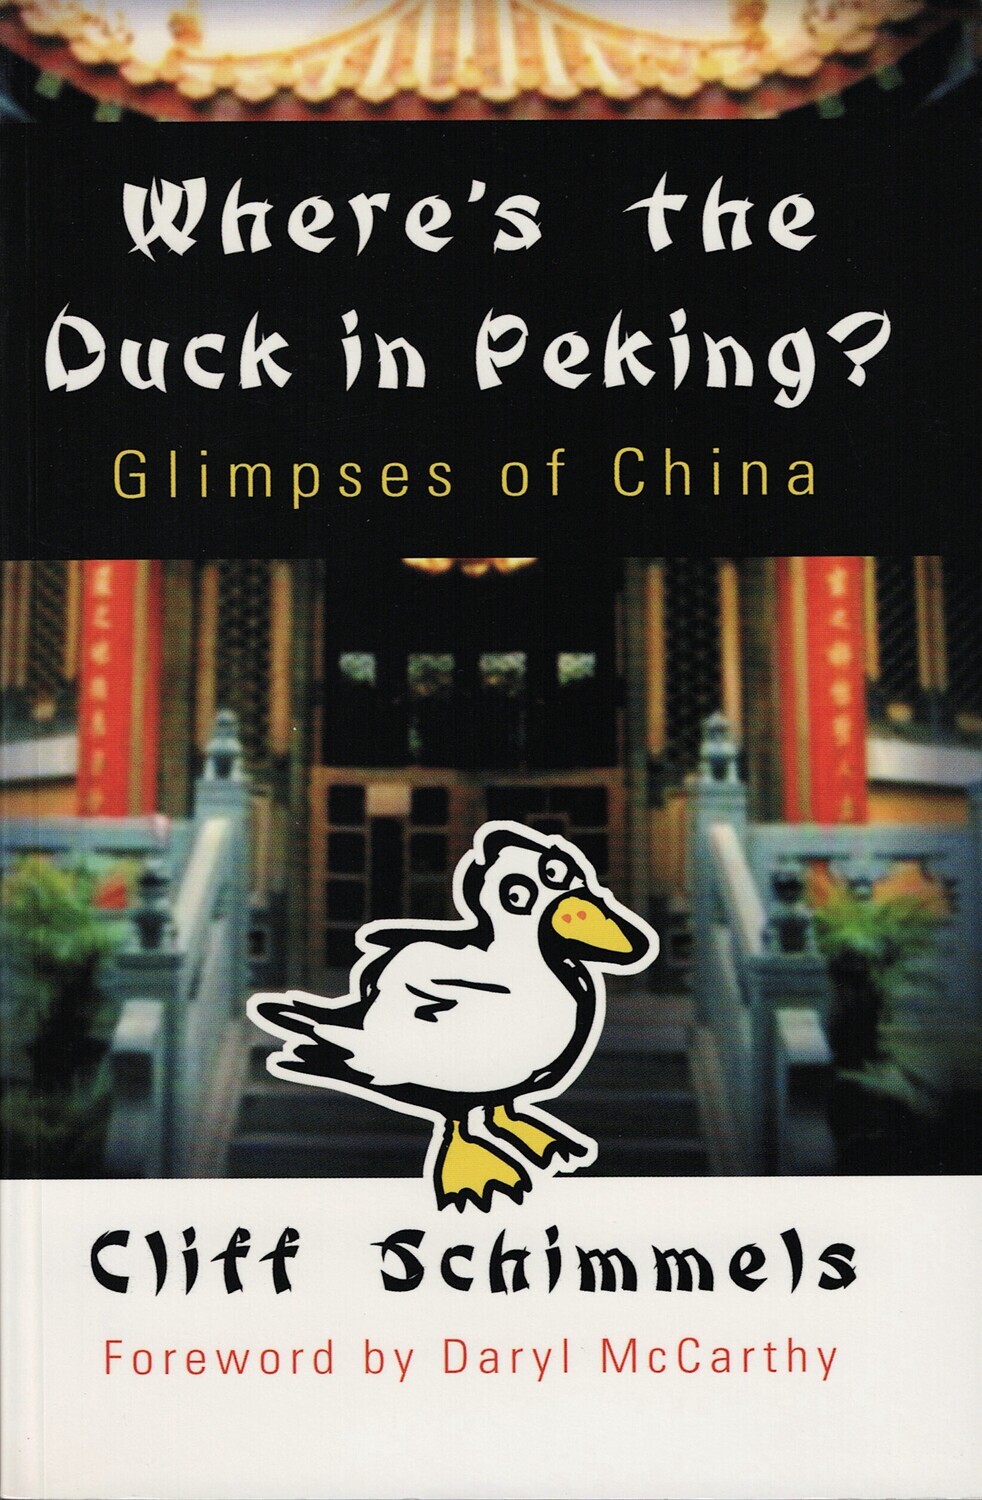 Where’s the Duck in Peking? (Glimpses of China)